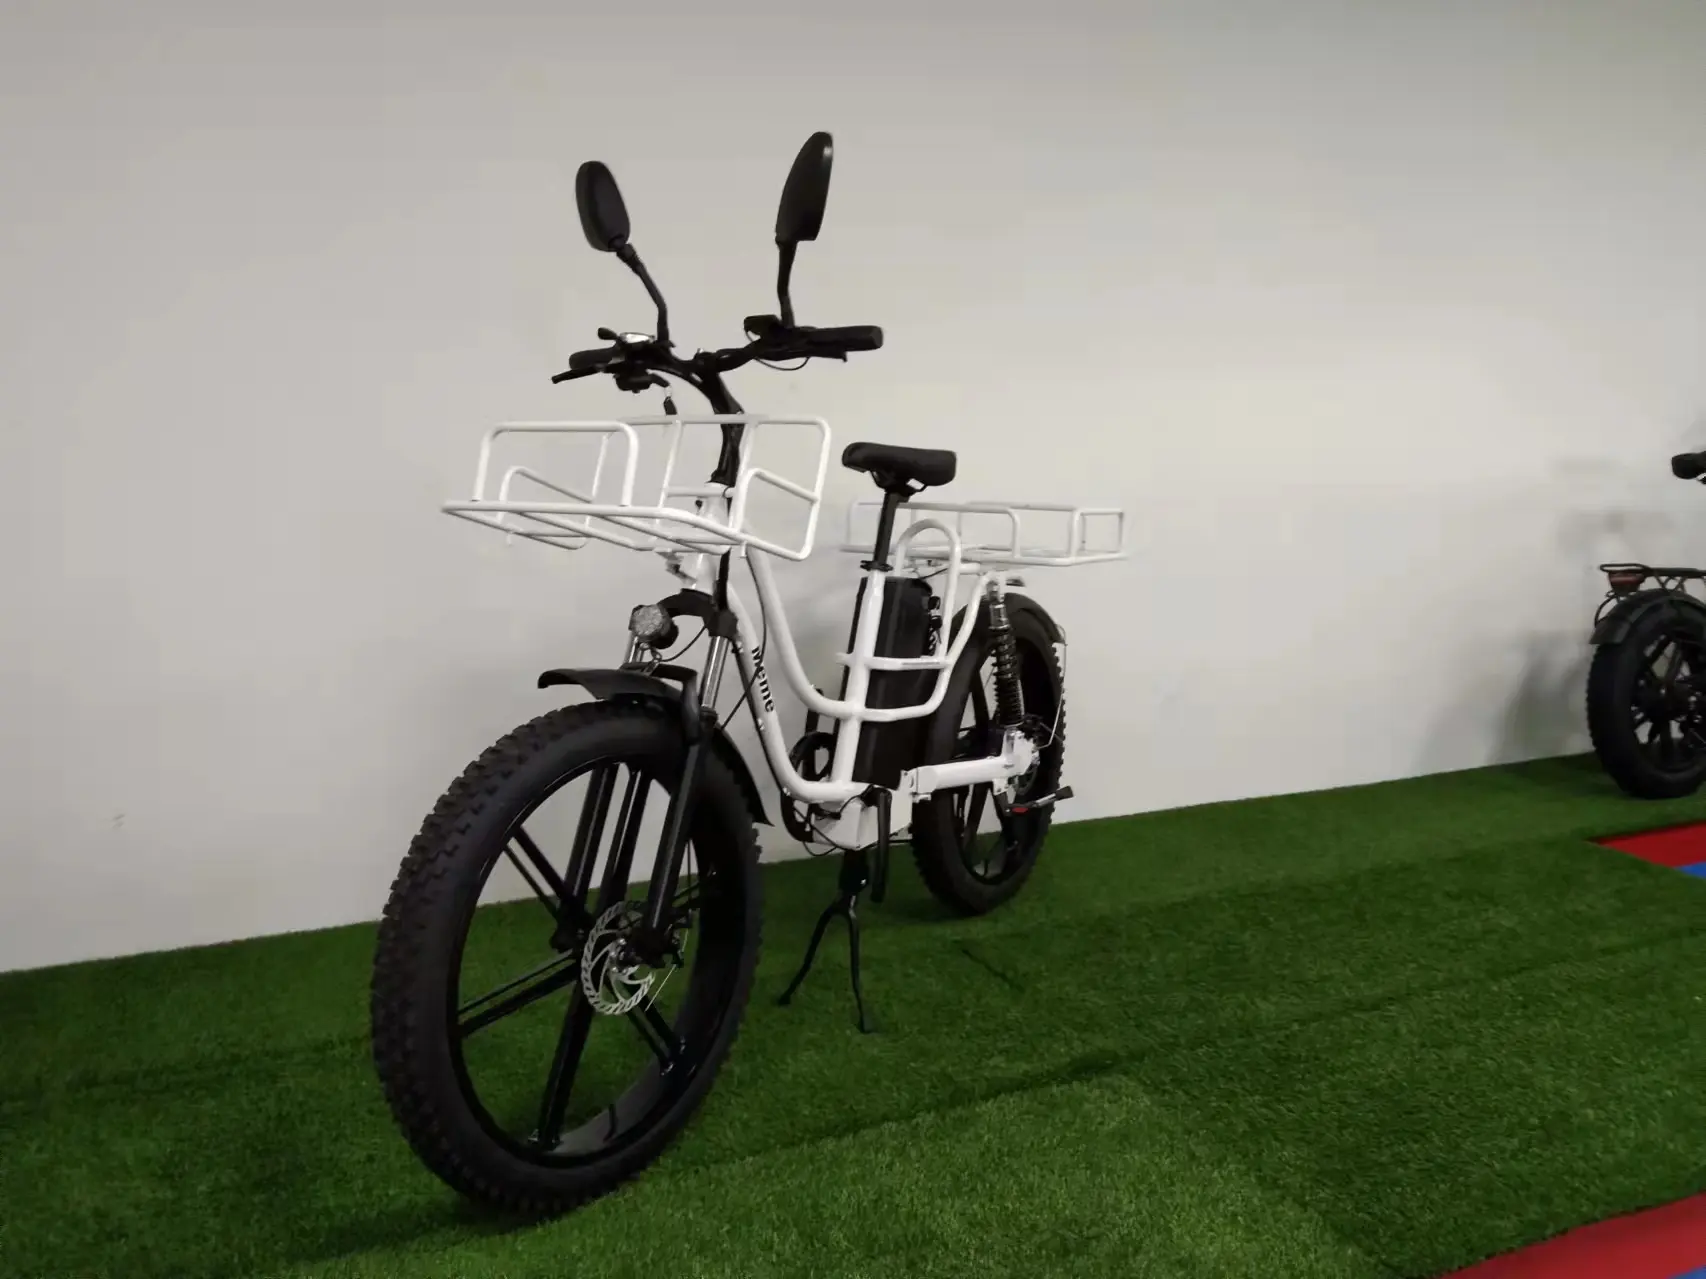 26" Fat Tire 750W/1000W 48V 32Ah Aluminum Alloy Frame Full Suspension 7 Speeds Electric Cargo Bike Electric Food Delivery Bike